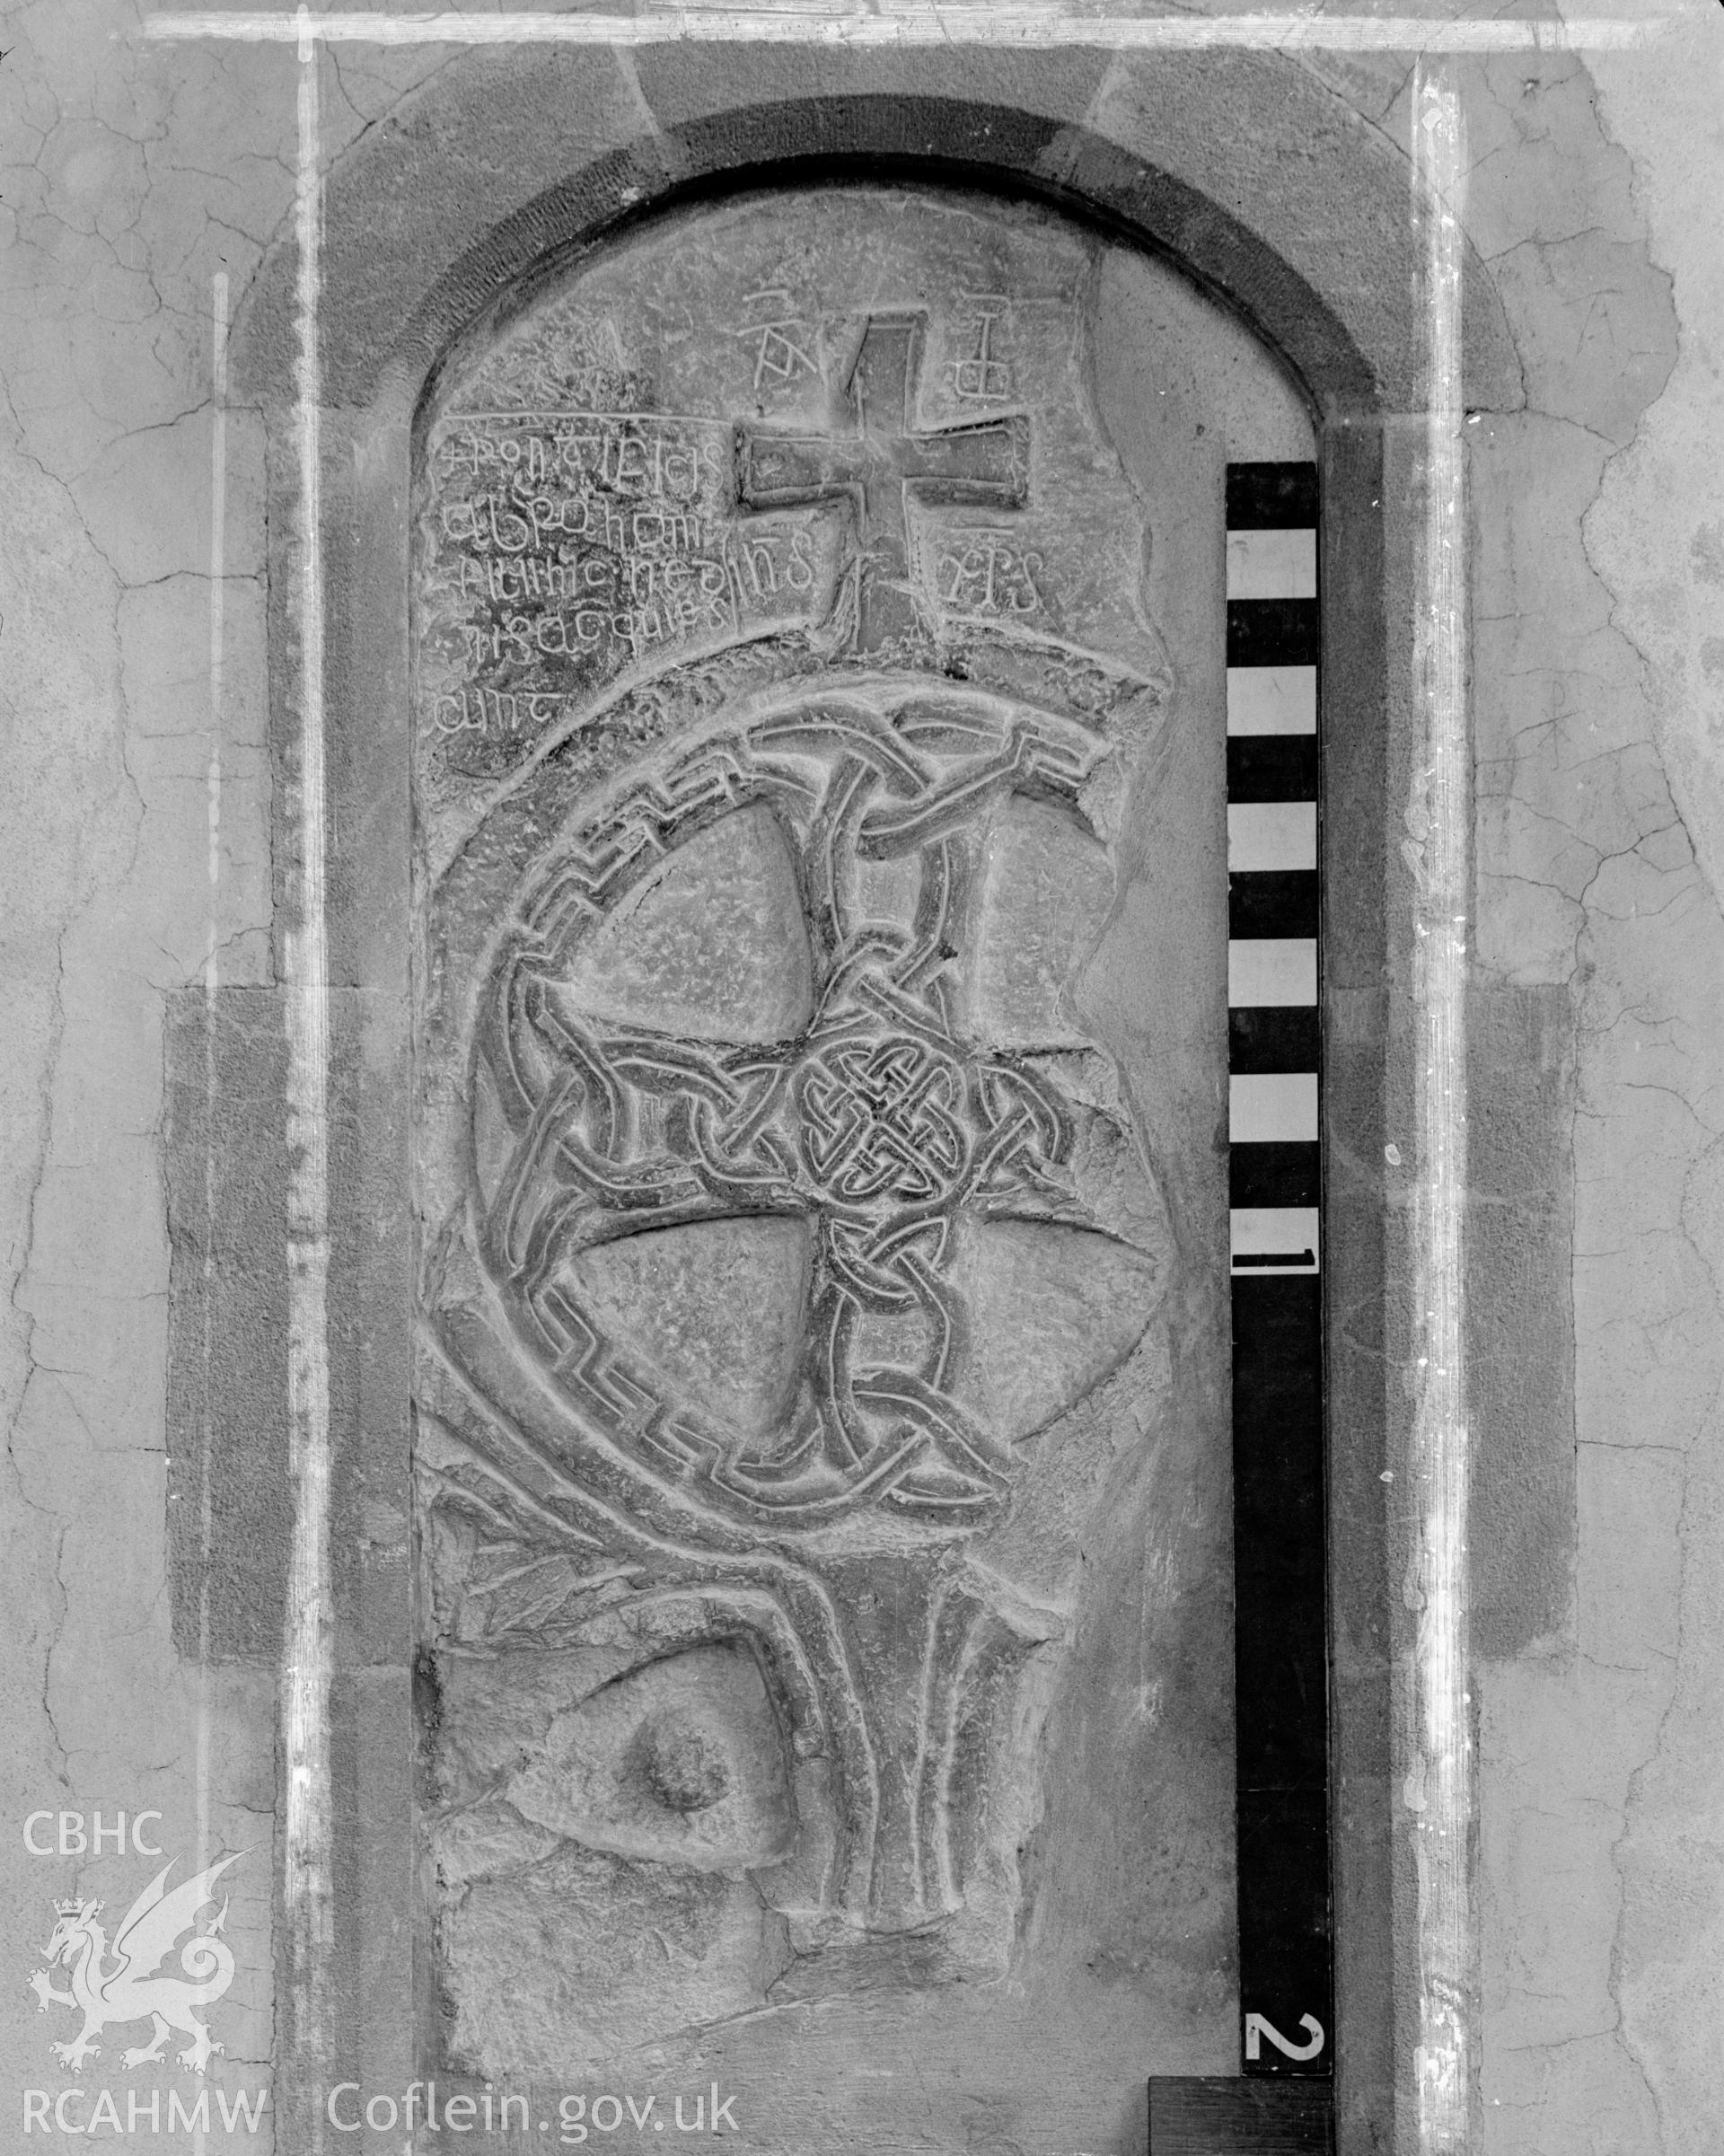 Digital copy of a black and white acetate negative showing view of inscribed stone inserted in archway at St. David's Cathedral, taken by E.W. Lovegrove, July 1936.